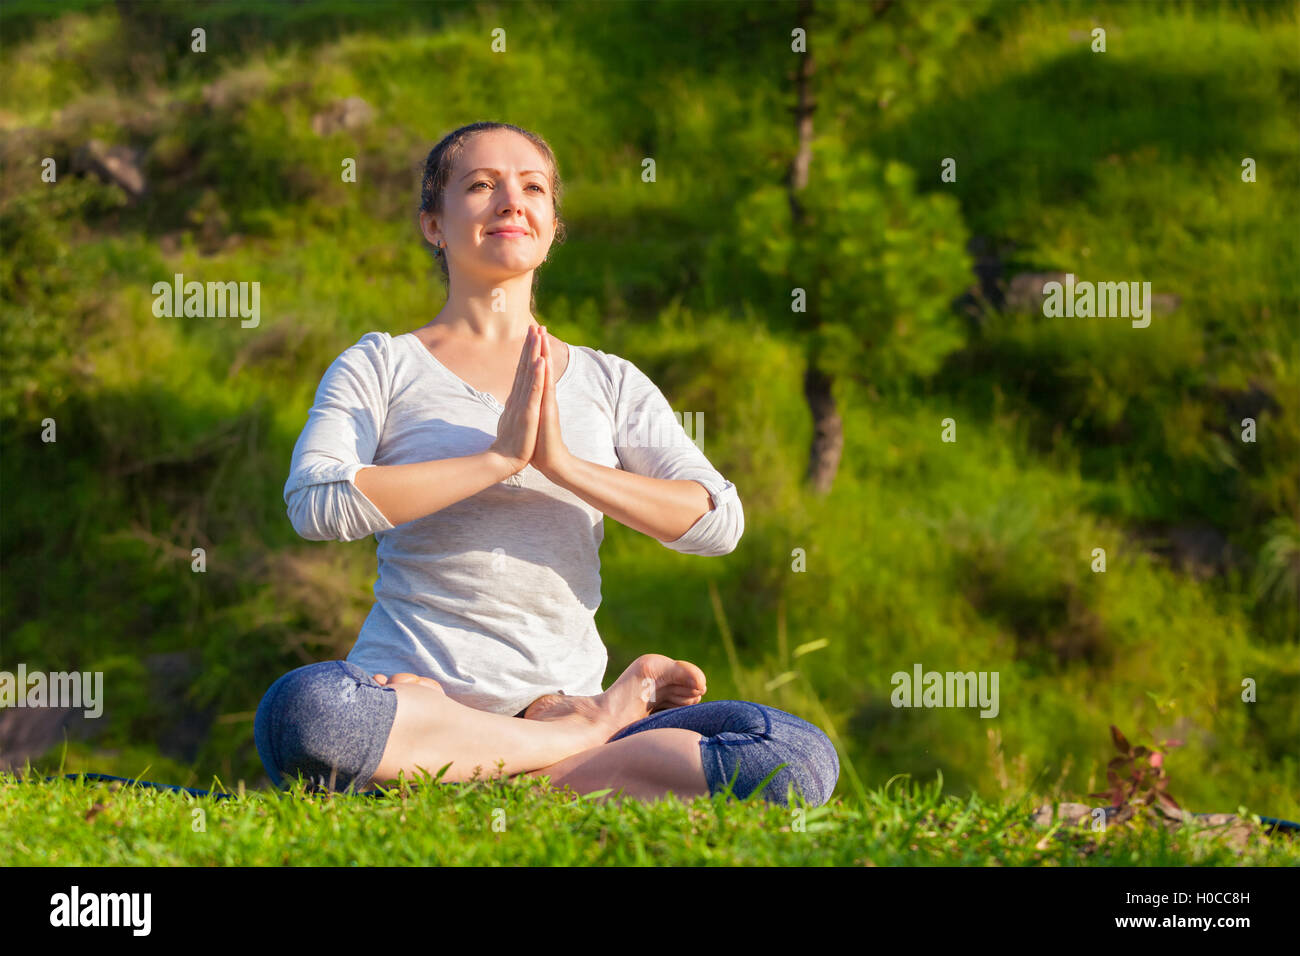 Young fit woman doing yoga Lotus poser oudoors Banque D'Images